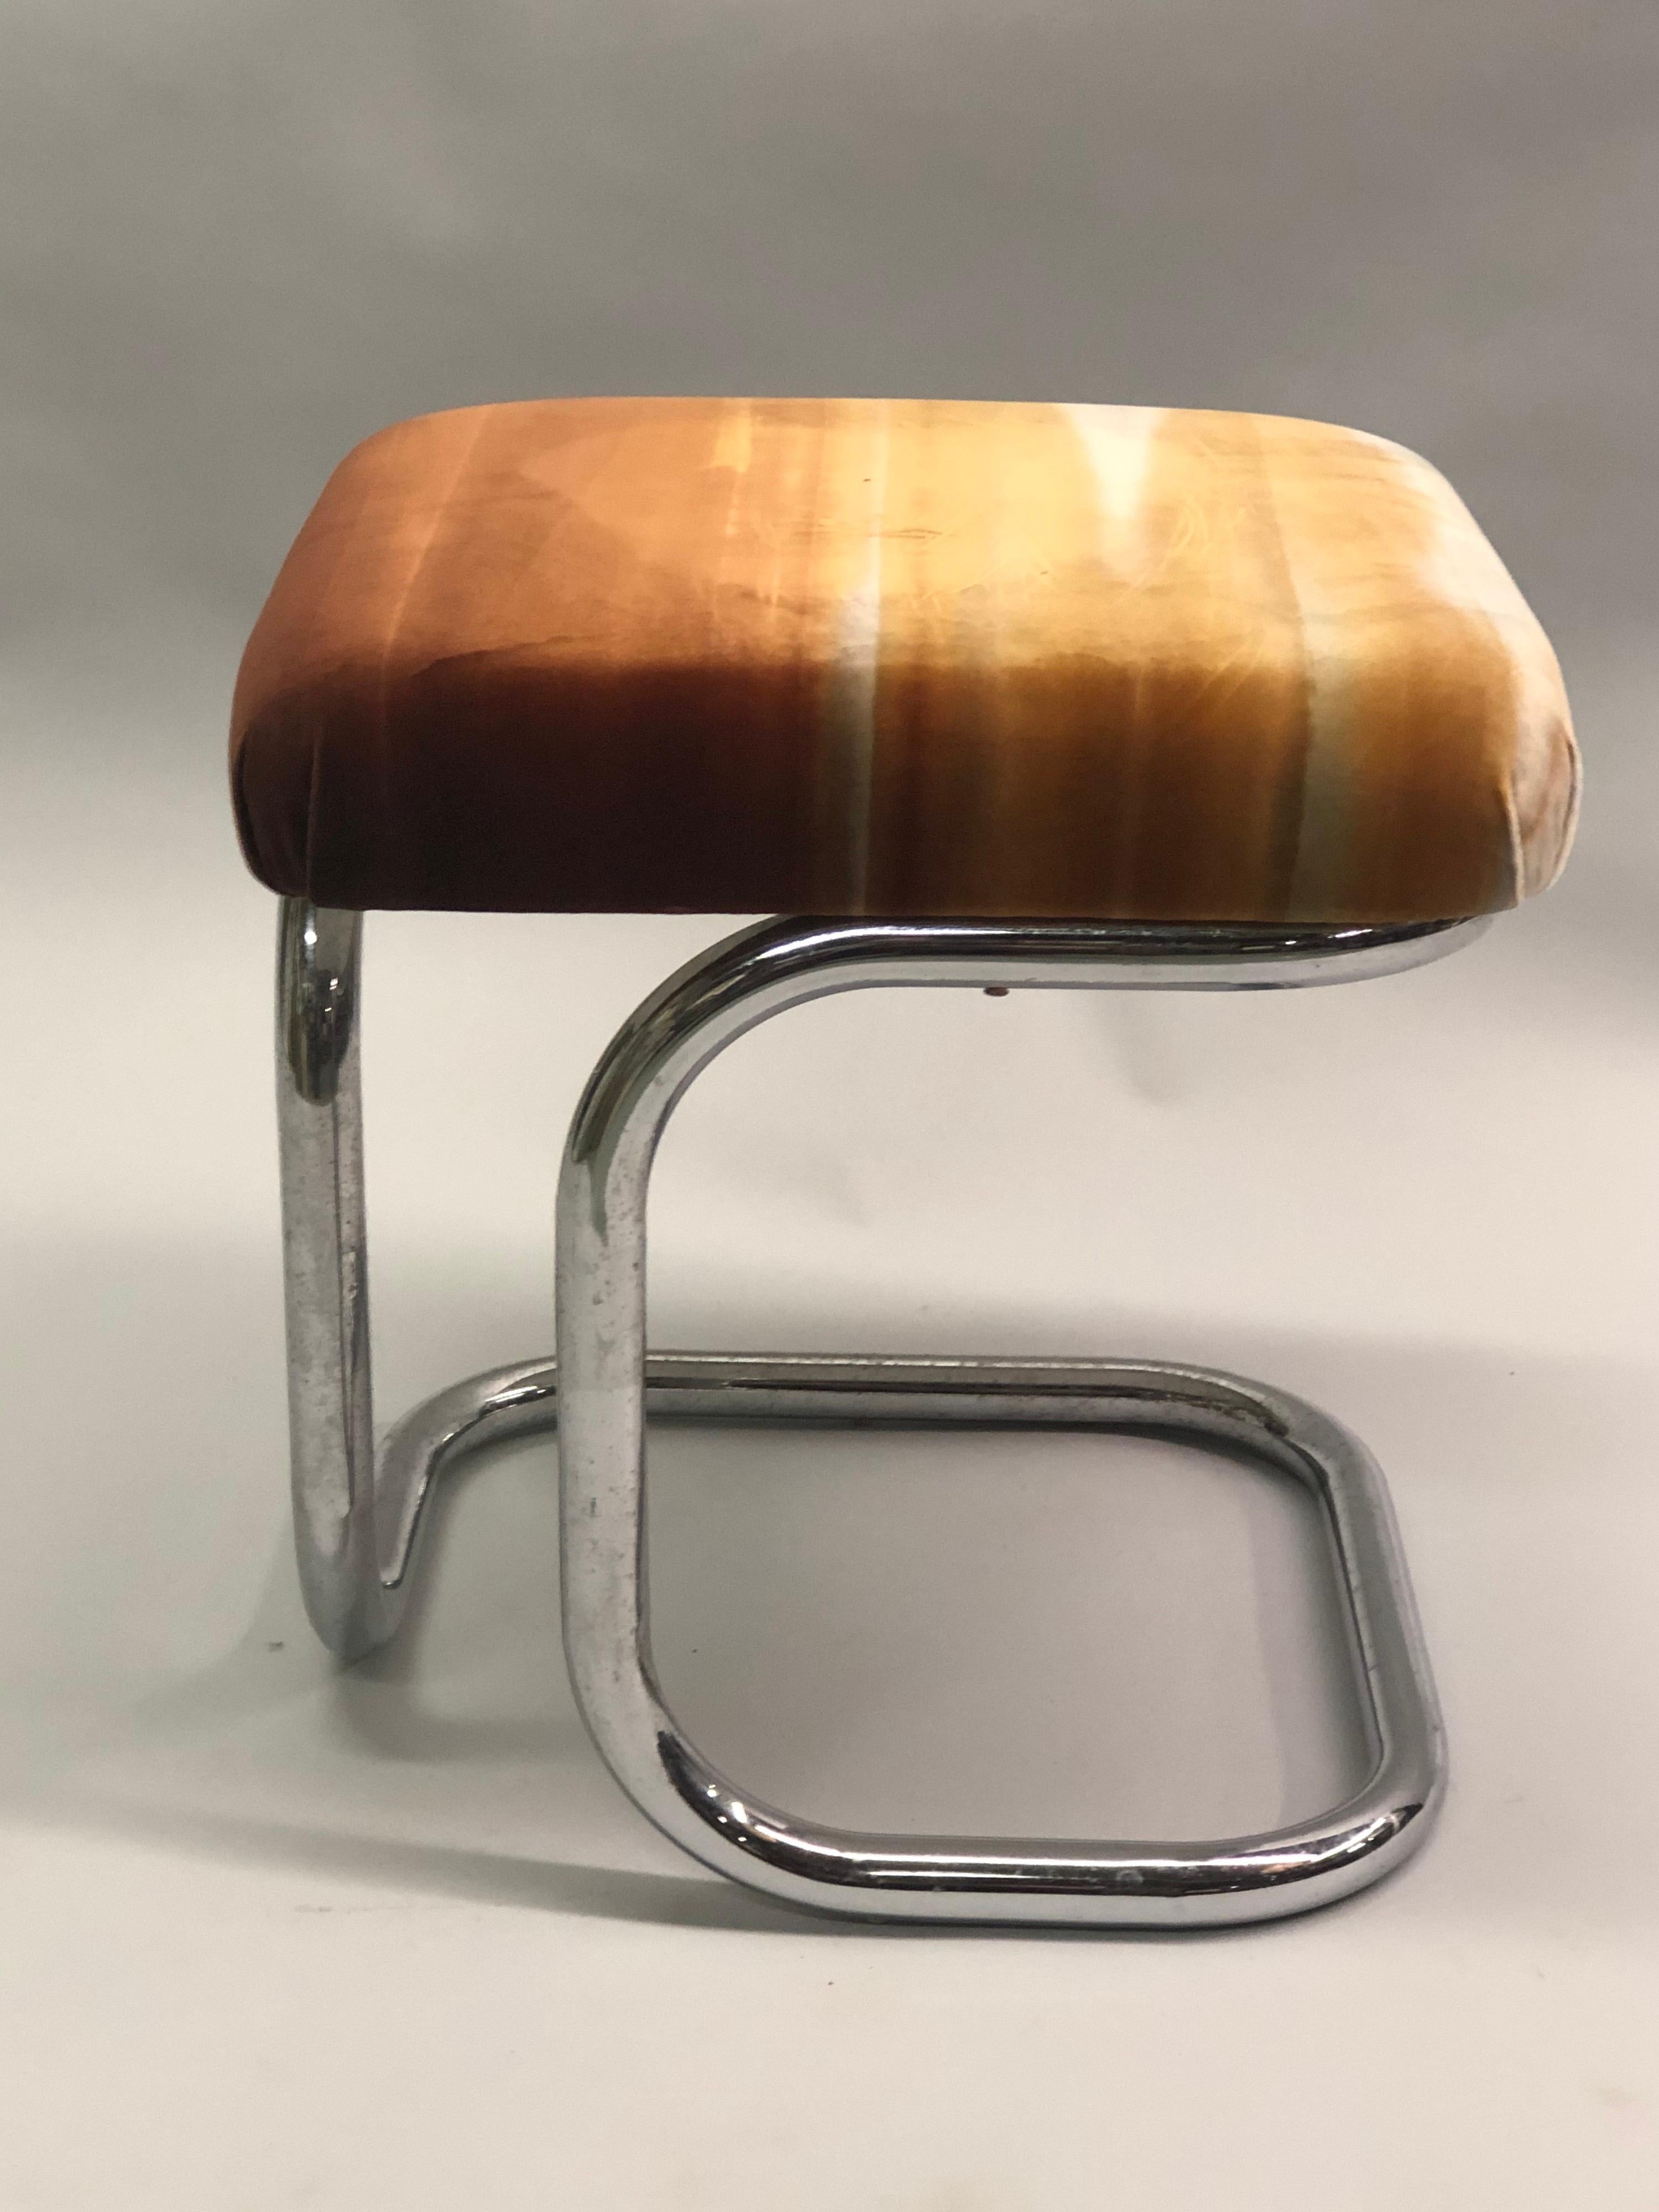 Pair of French Modernist ‘Bauhaus’ Stools with Upholstered Seats by Hermès For Sale 2